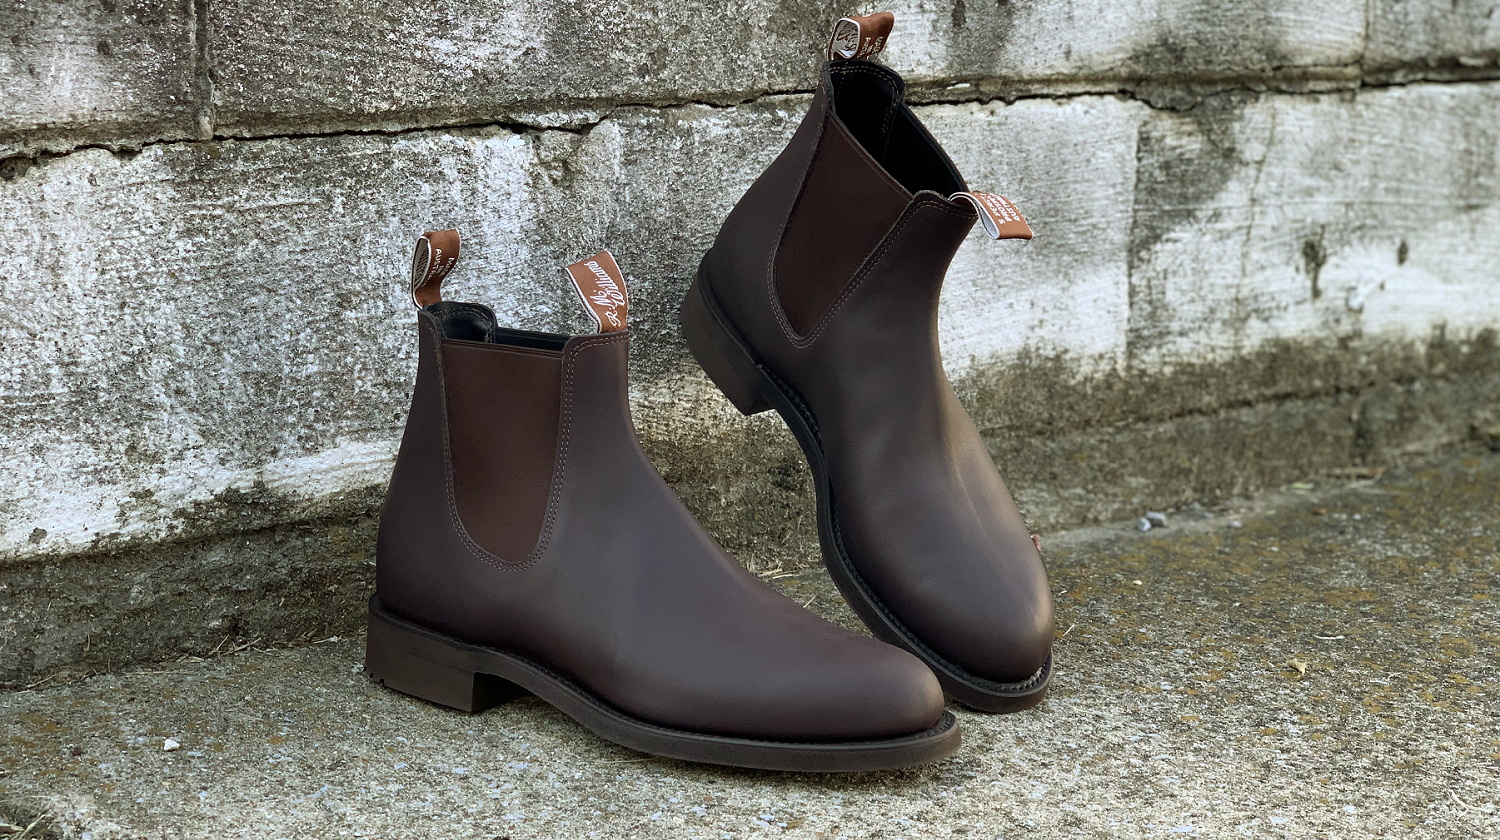 rm williams chelsea boots